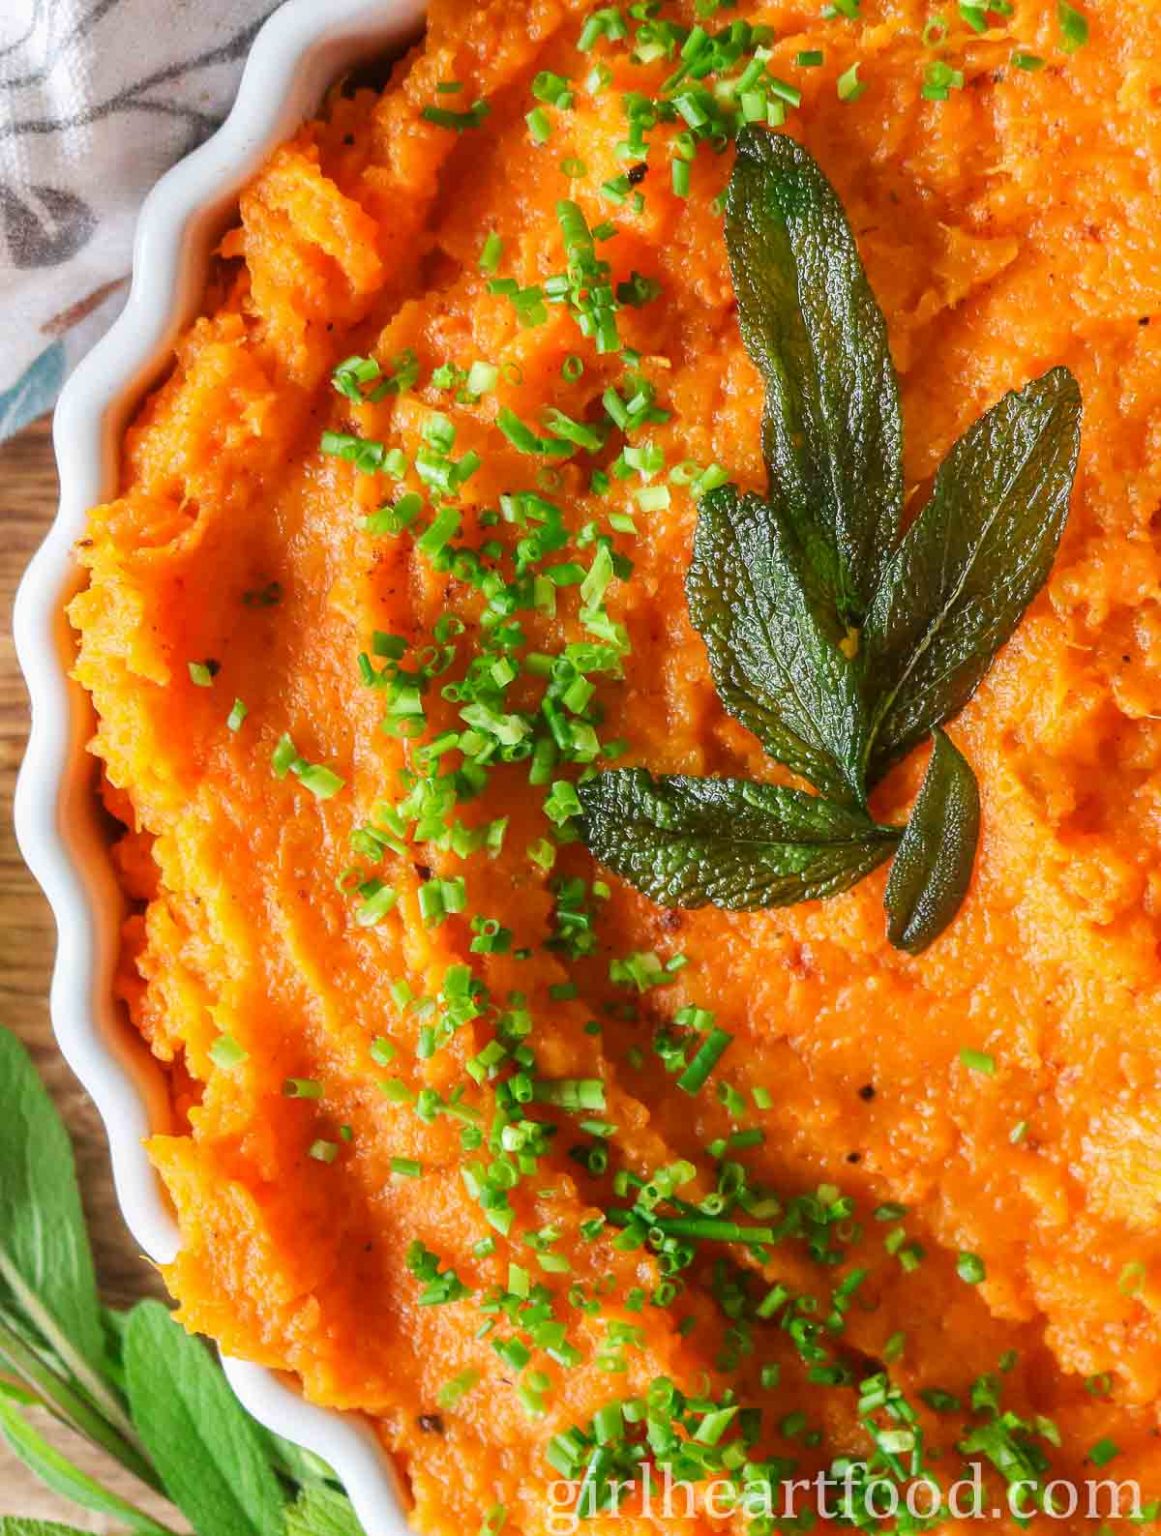 Mashed Butternut Squash and Sweet Potato | Girl Heart Food®